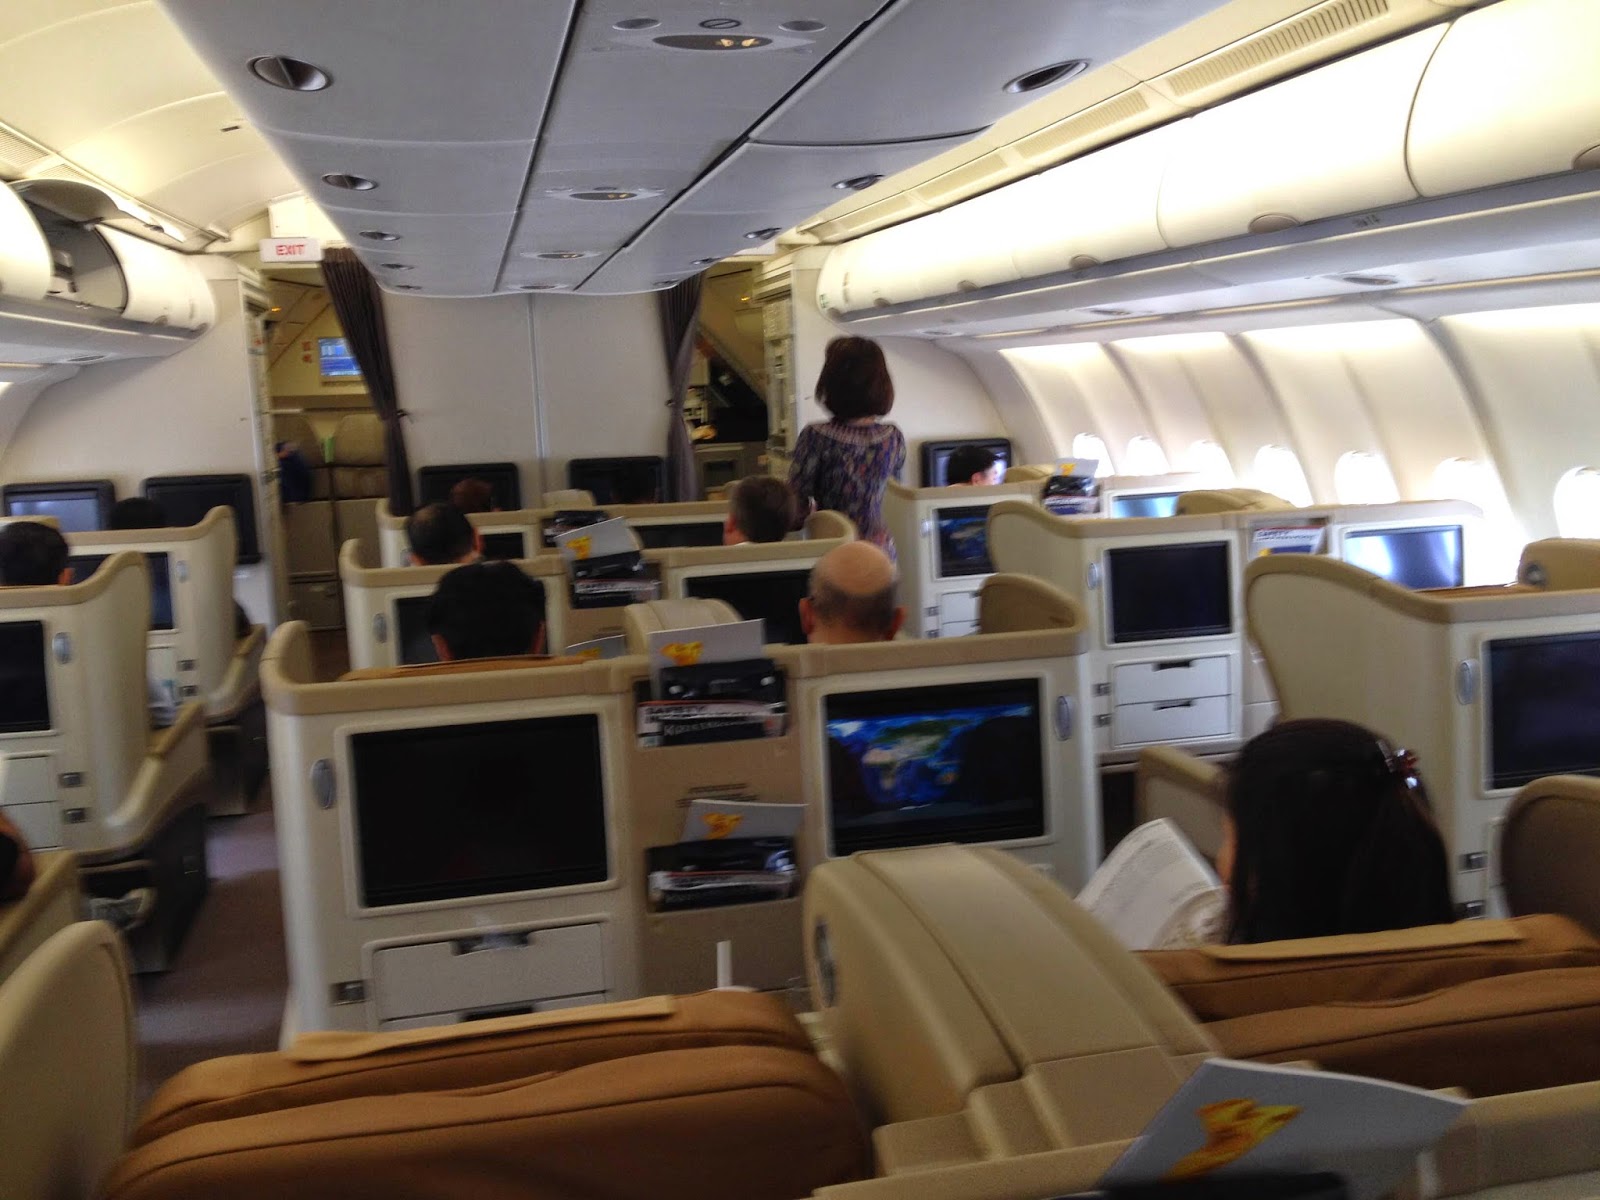 singapore airlines a330